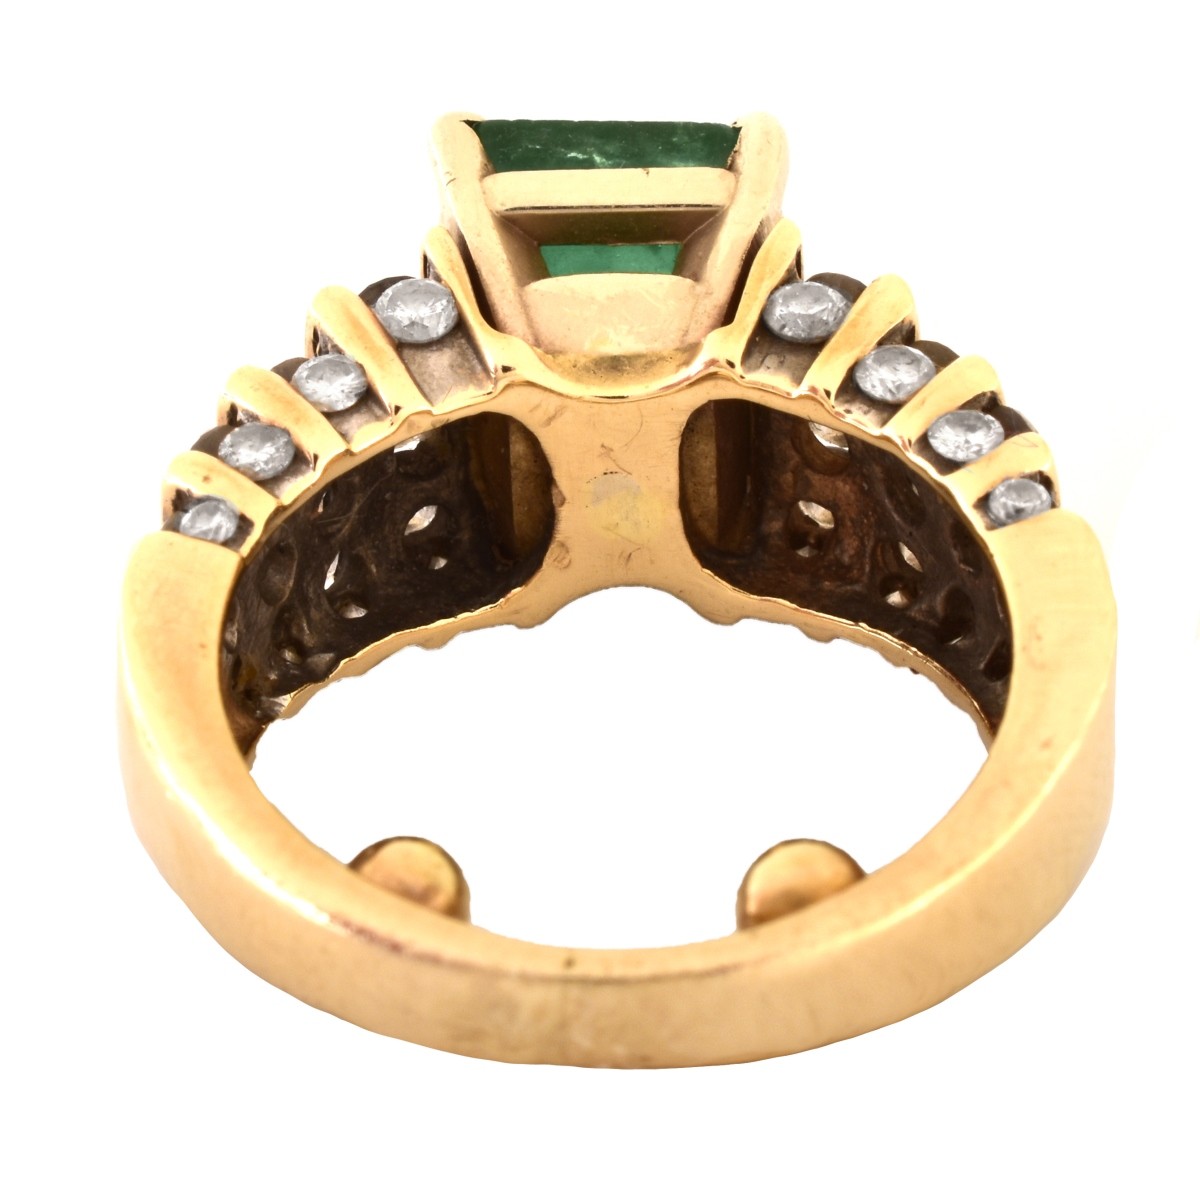 Emerald, Diamond and 14K Gold Ring